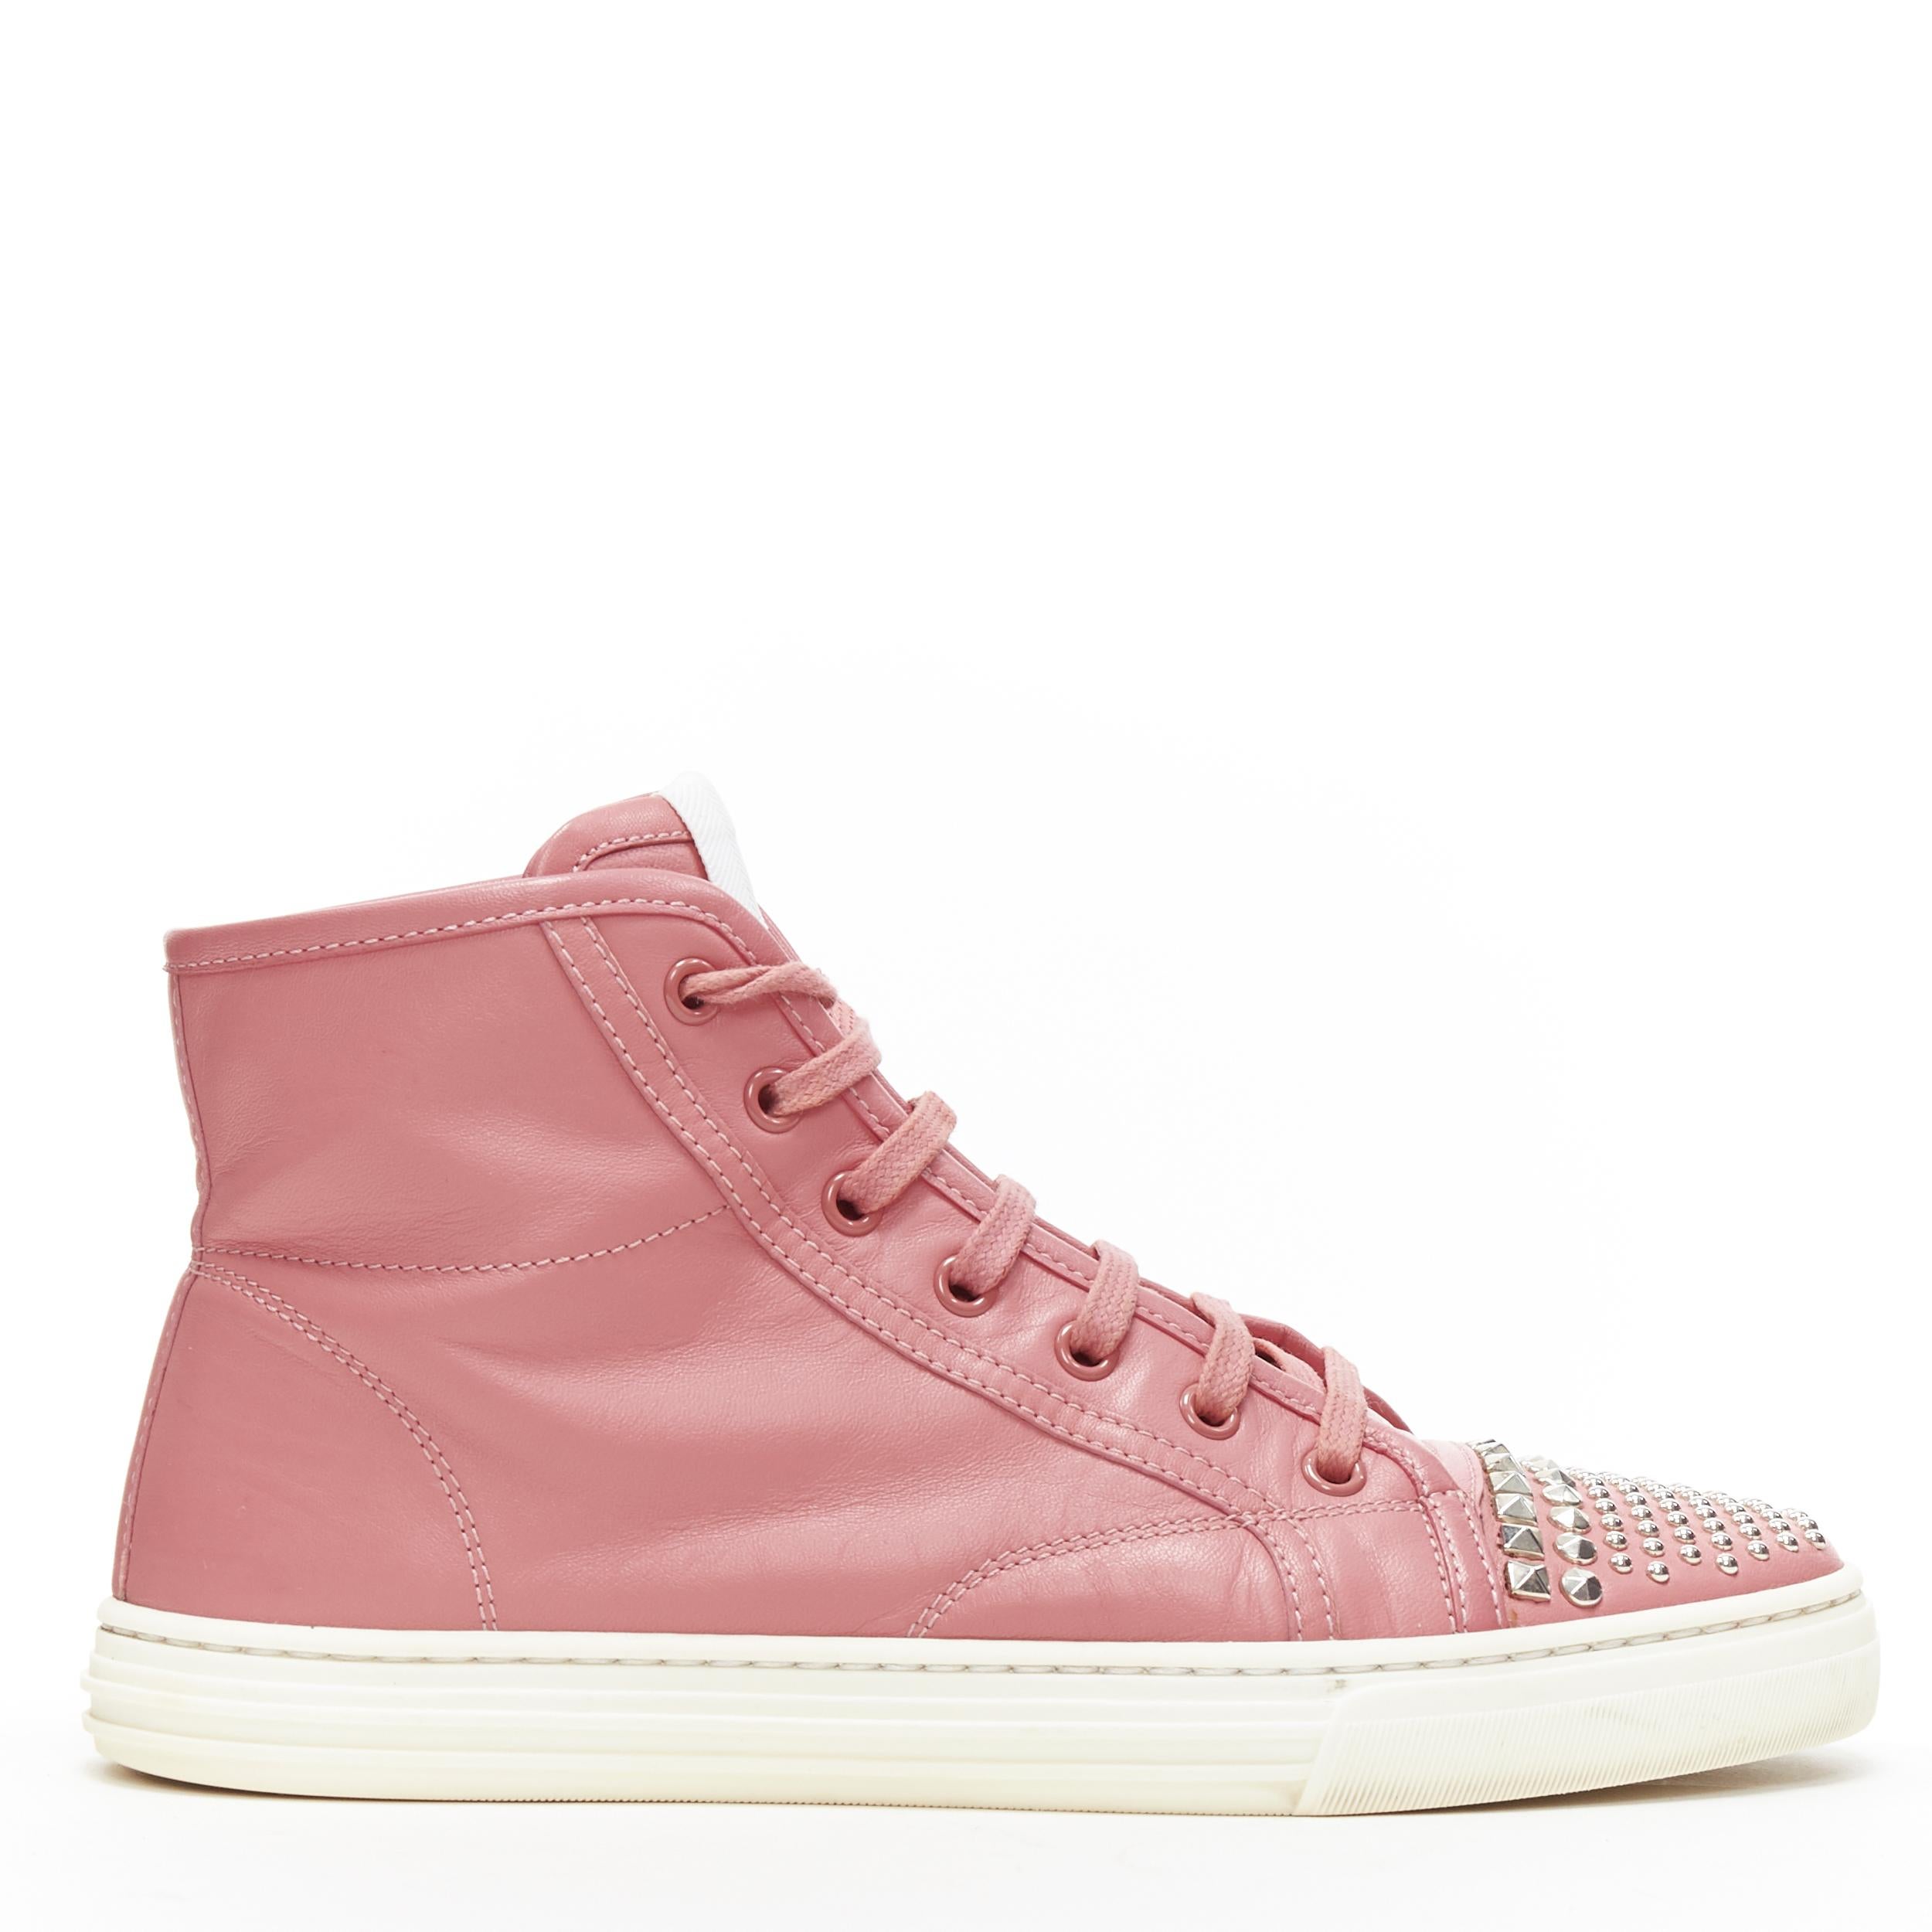 GUCCI pink leather studded toe cap high top casual sneakesr EU36.5
Brand: Gucci
Model Name / Style: High top sneakers
Material: Leather
Color: Pink
Pattern: Solid
Closure: Lace up
Extra Detail: Flat (Under 1 in) heel height. Round toe.
Made in: